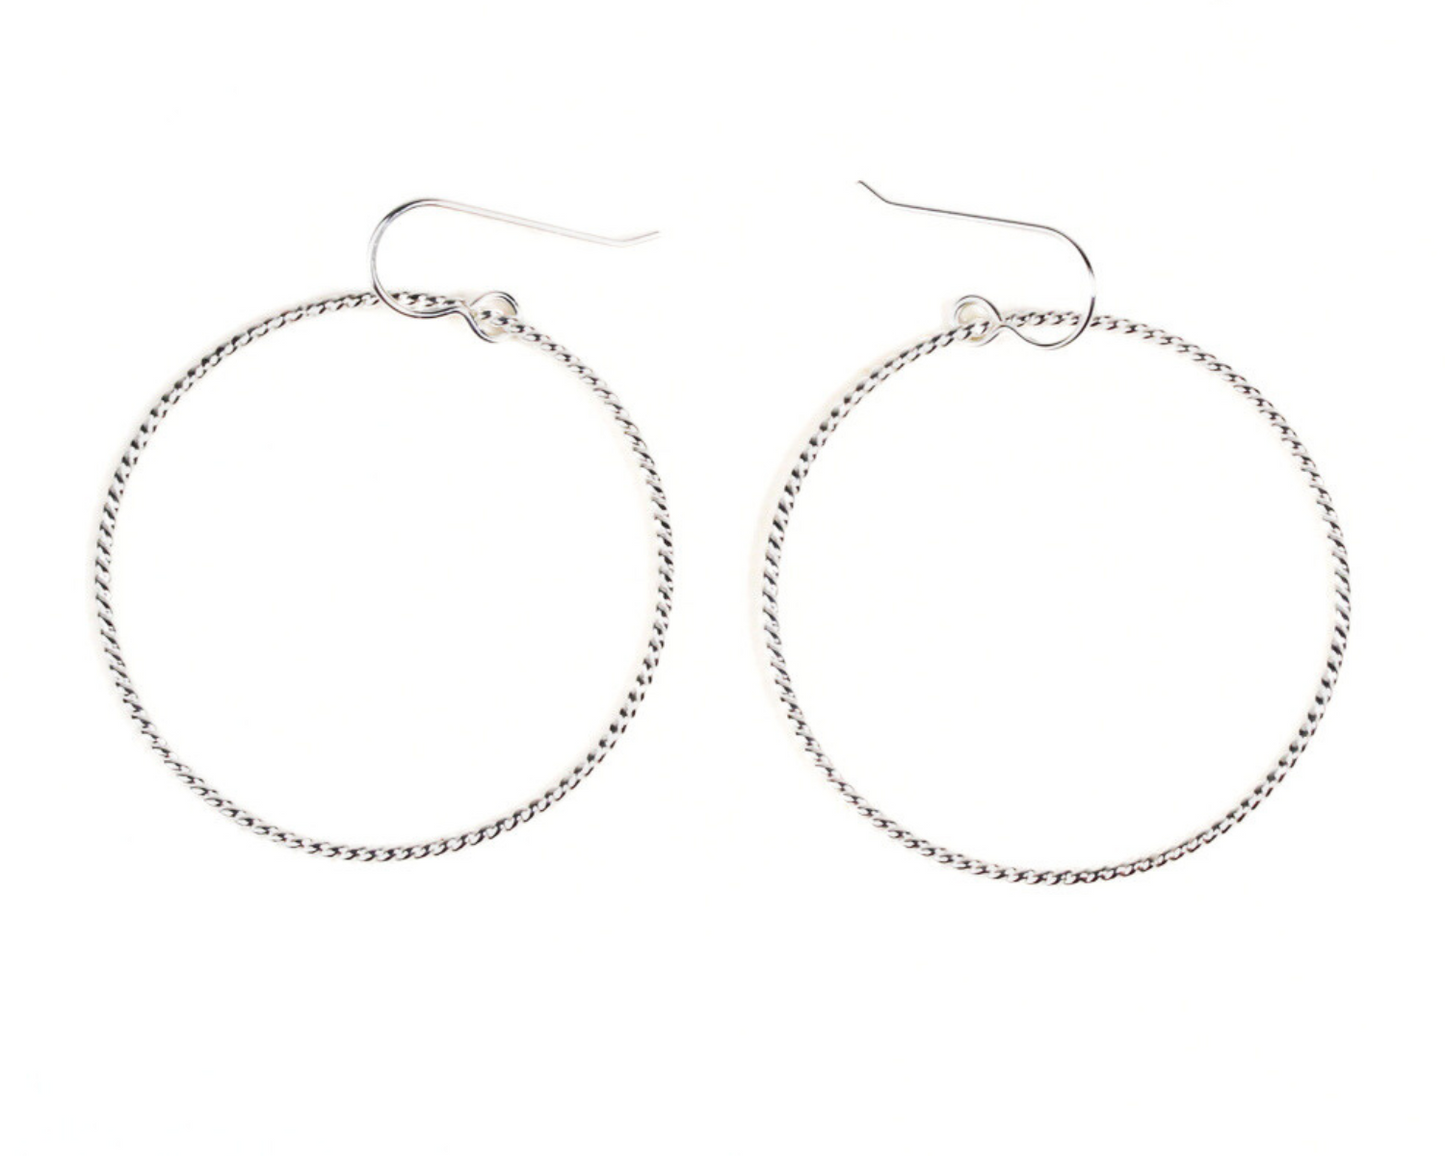 Select your Twisted Hoops in 925 Sterling Silver or 14 karat Yellow Gold Filled or Rose Gold Filled. Select size Small, measuring 1 inch or Medium, 1.5 inches. Bring Twisted Hoop Earrings into your wardrobe and discover an instant everyday favorite.